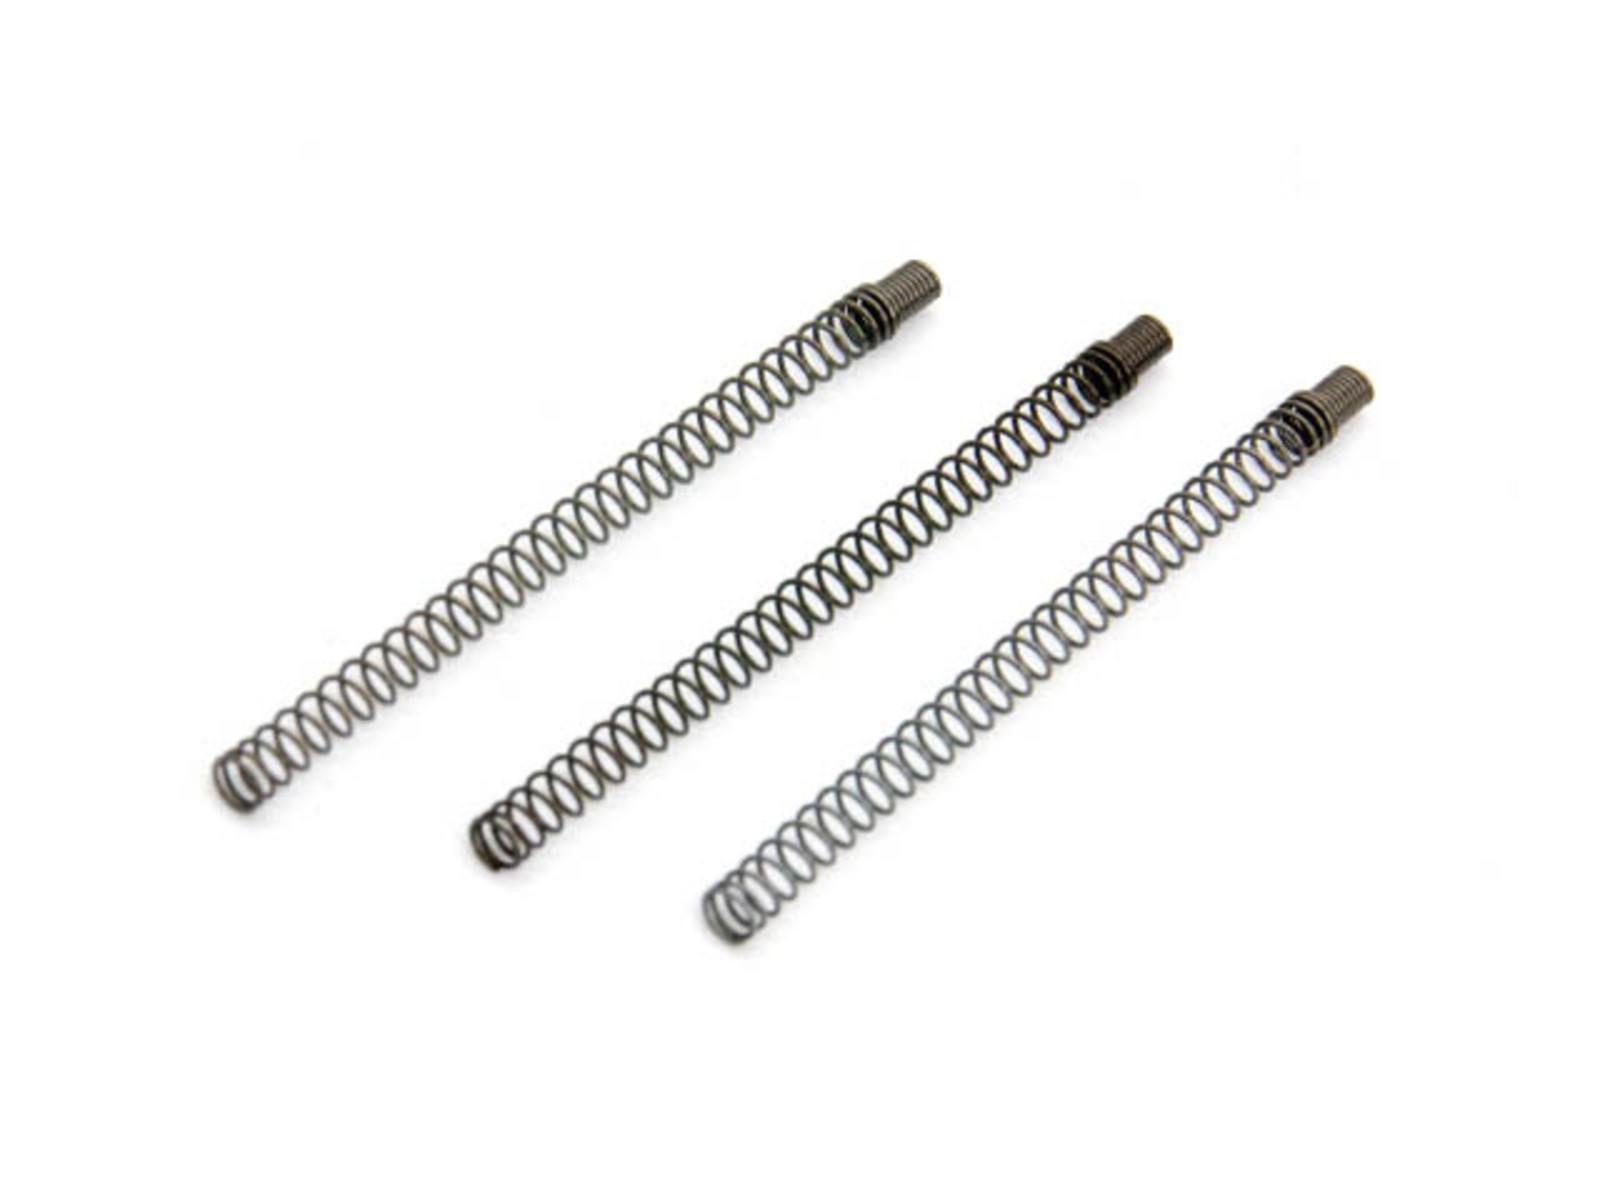 AIP AIP 140% Enhance Loading Nozzle Spring For Marui 5.1/ 4.3/1911